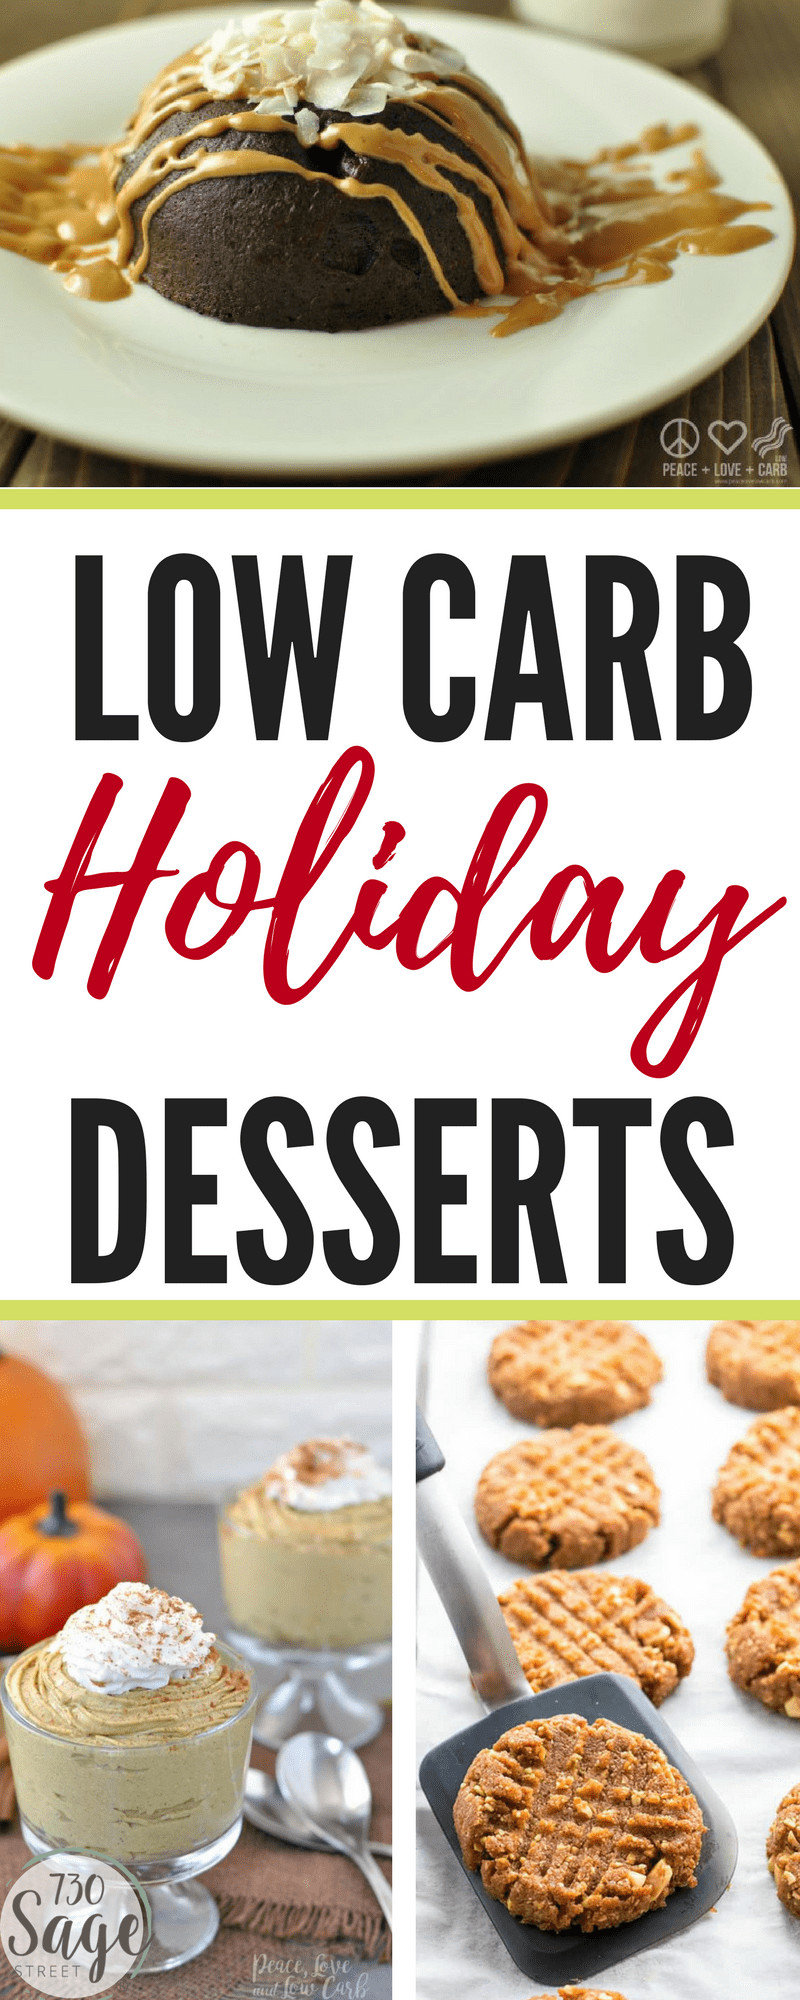 Low Carb Holiday Recipes
 Low Carb Holiday Desserts – 15 Delicious Recipes